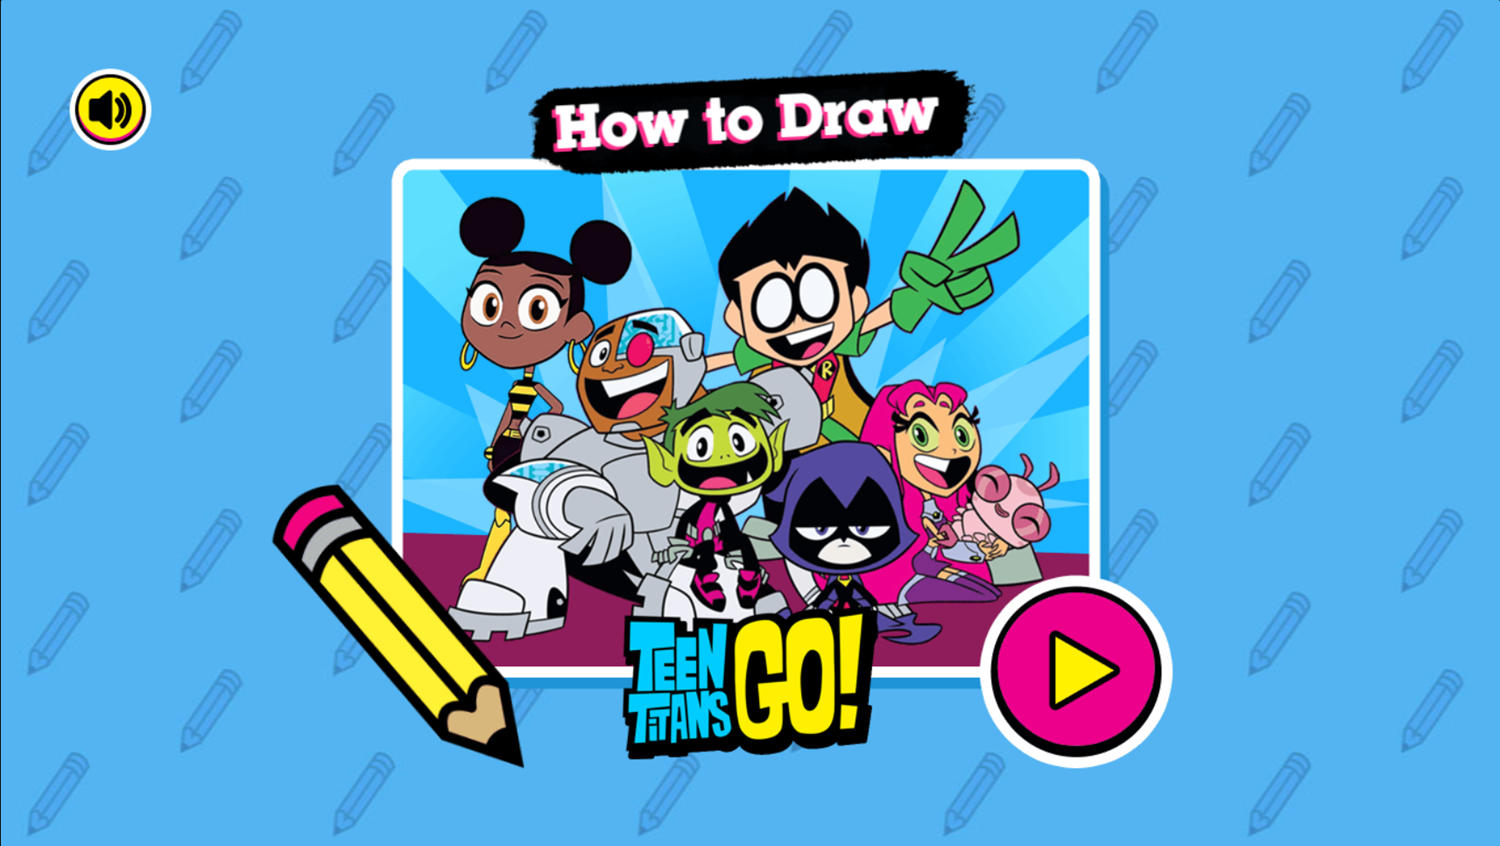 Teen Titans Go How to Draw Teen Titans Go Game Welcome Screen Screenshot.